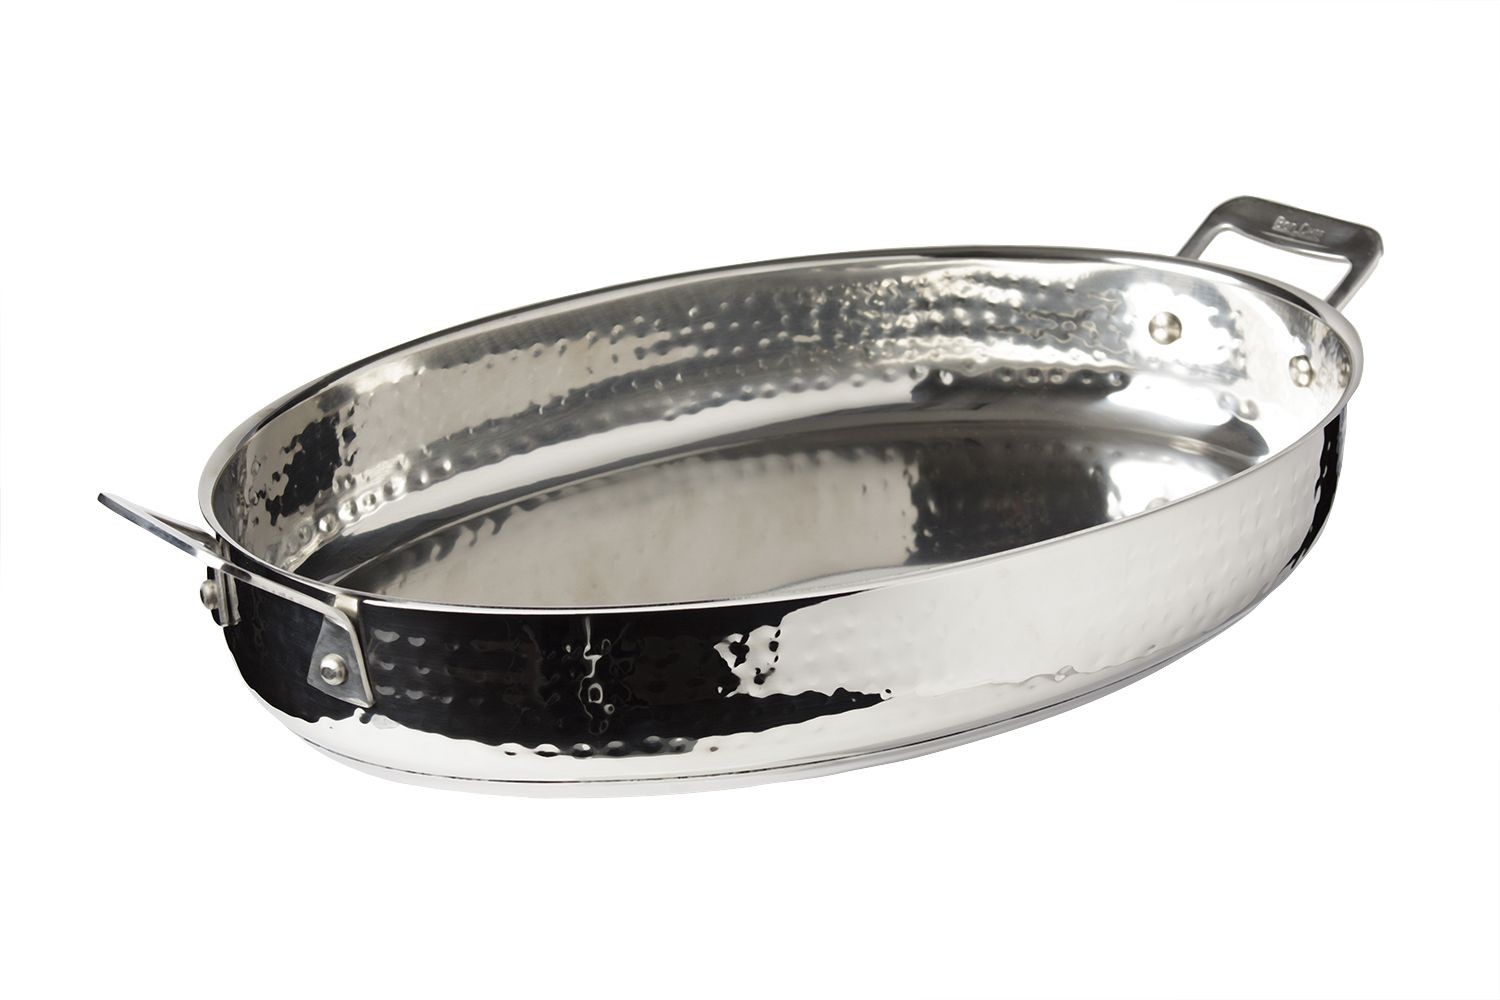 Bon Chef 60018HF Cucina Stainless Steel Oval Au Gratin, Hammered Finish, 4 Qt.